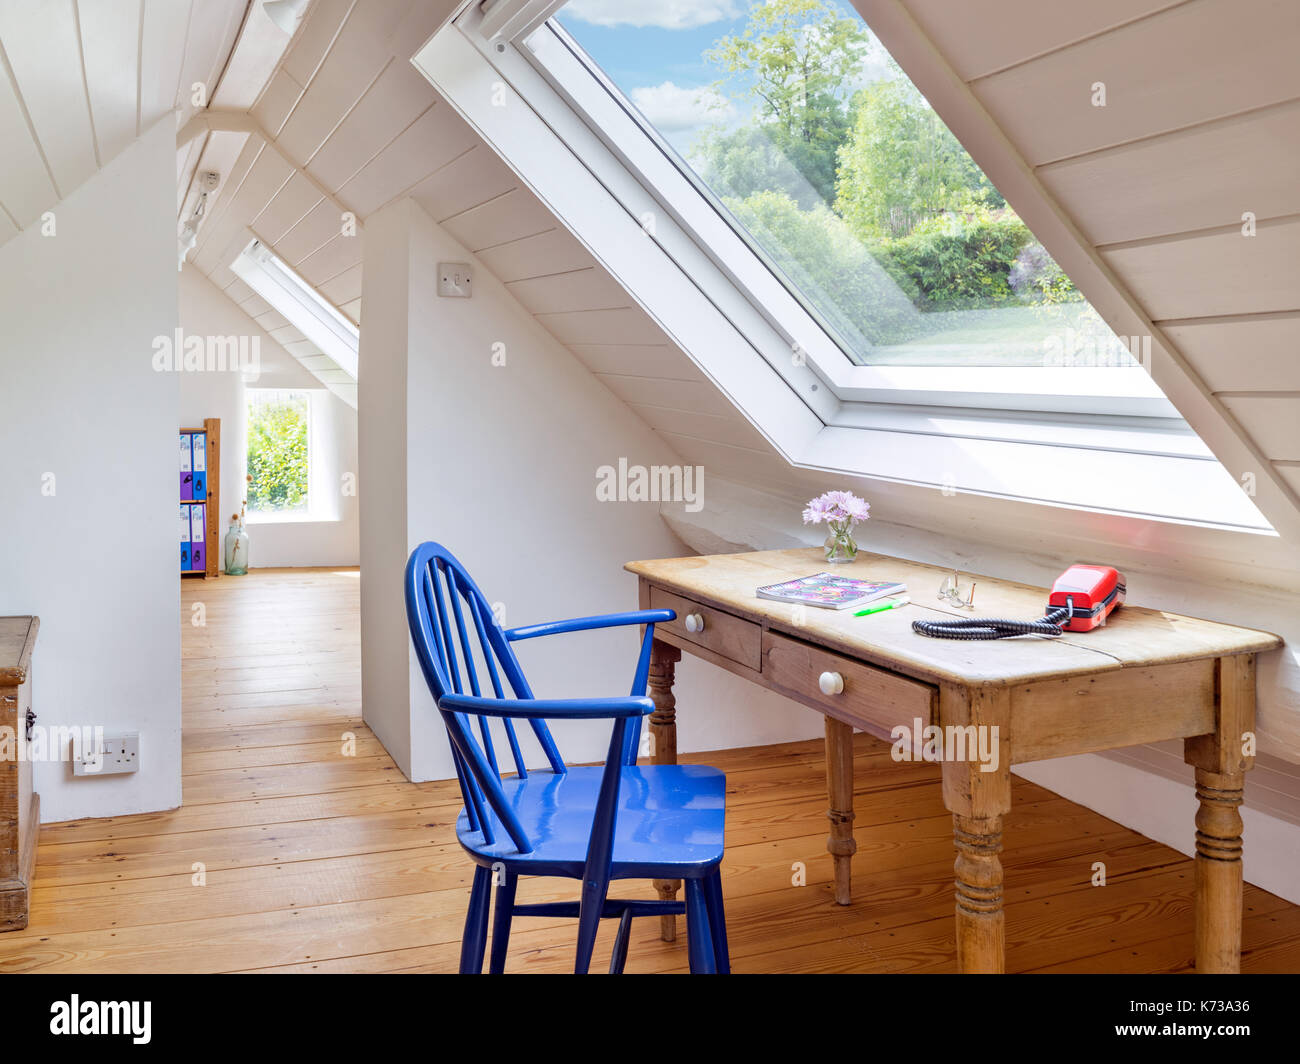 A bright and airy loft conversion, creating a great useable office space with a view of the garden Stock Photo